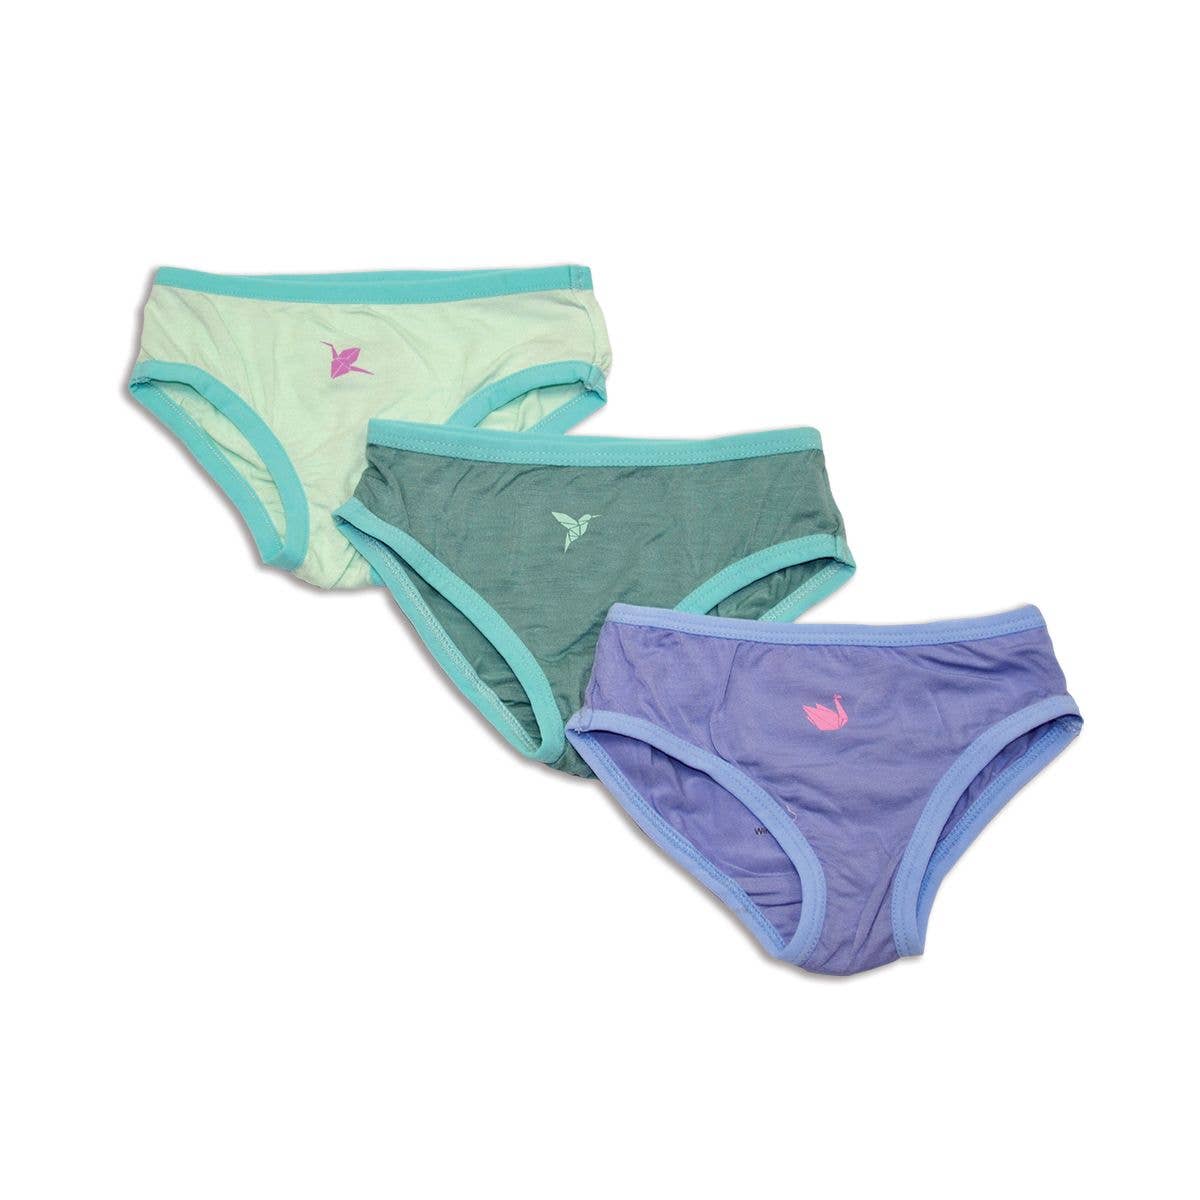 linqin Underpants Girls Sweatproof Underwear Bamboo Soft No See